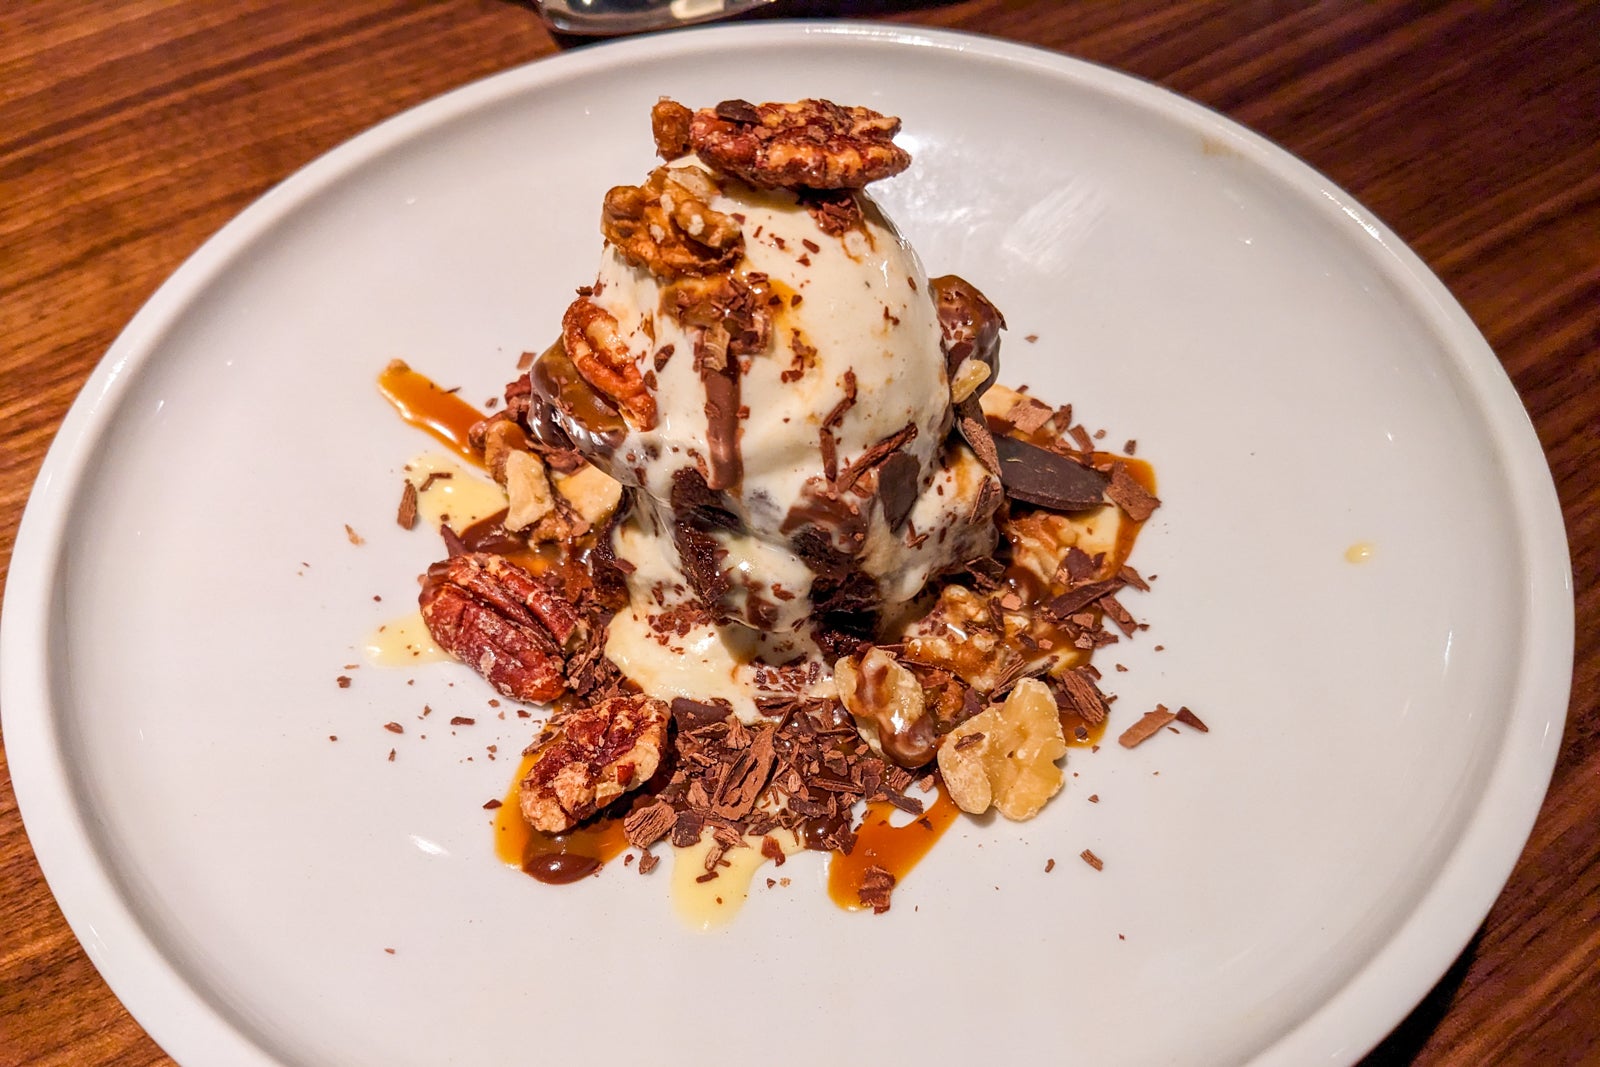 Brownie sundae with ice cream and pecans